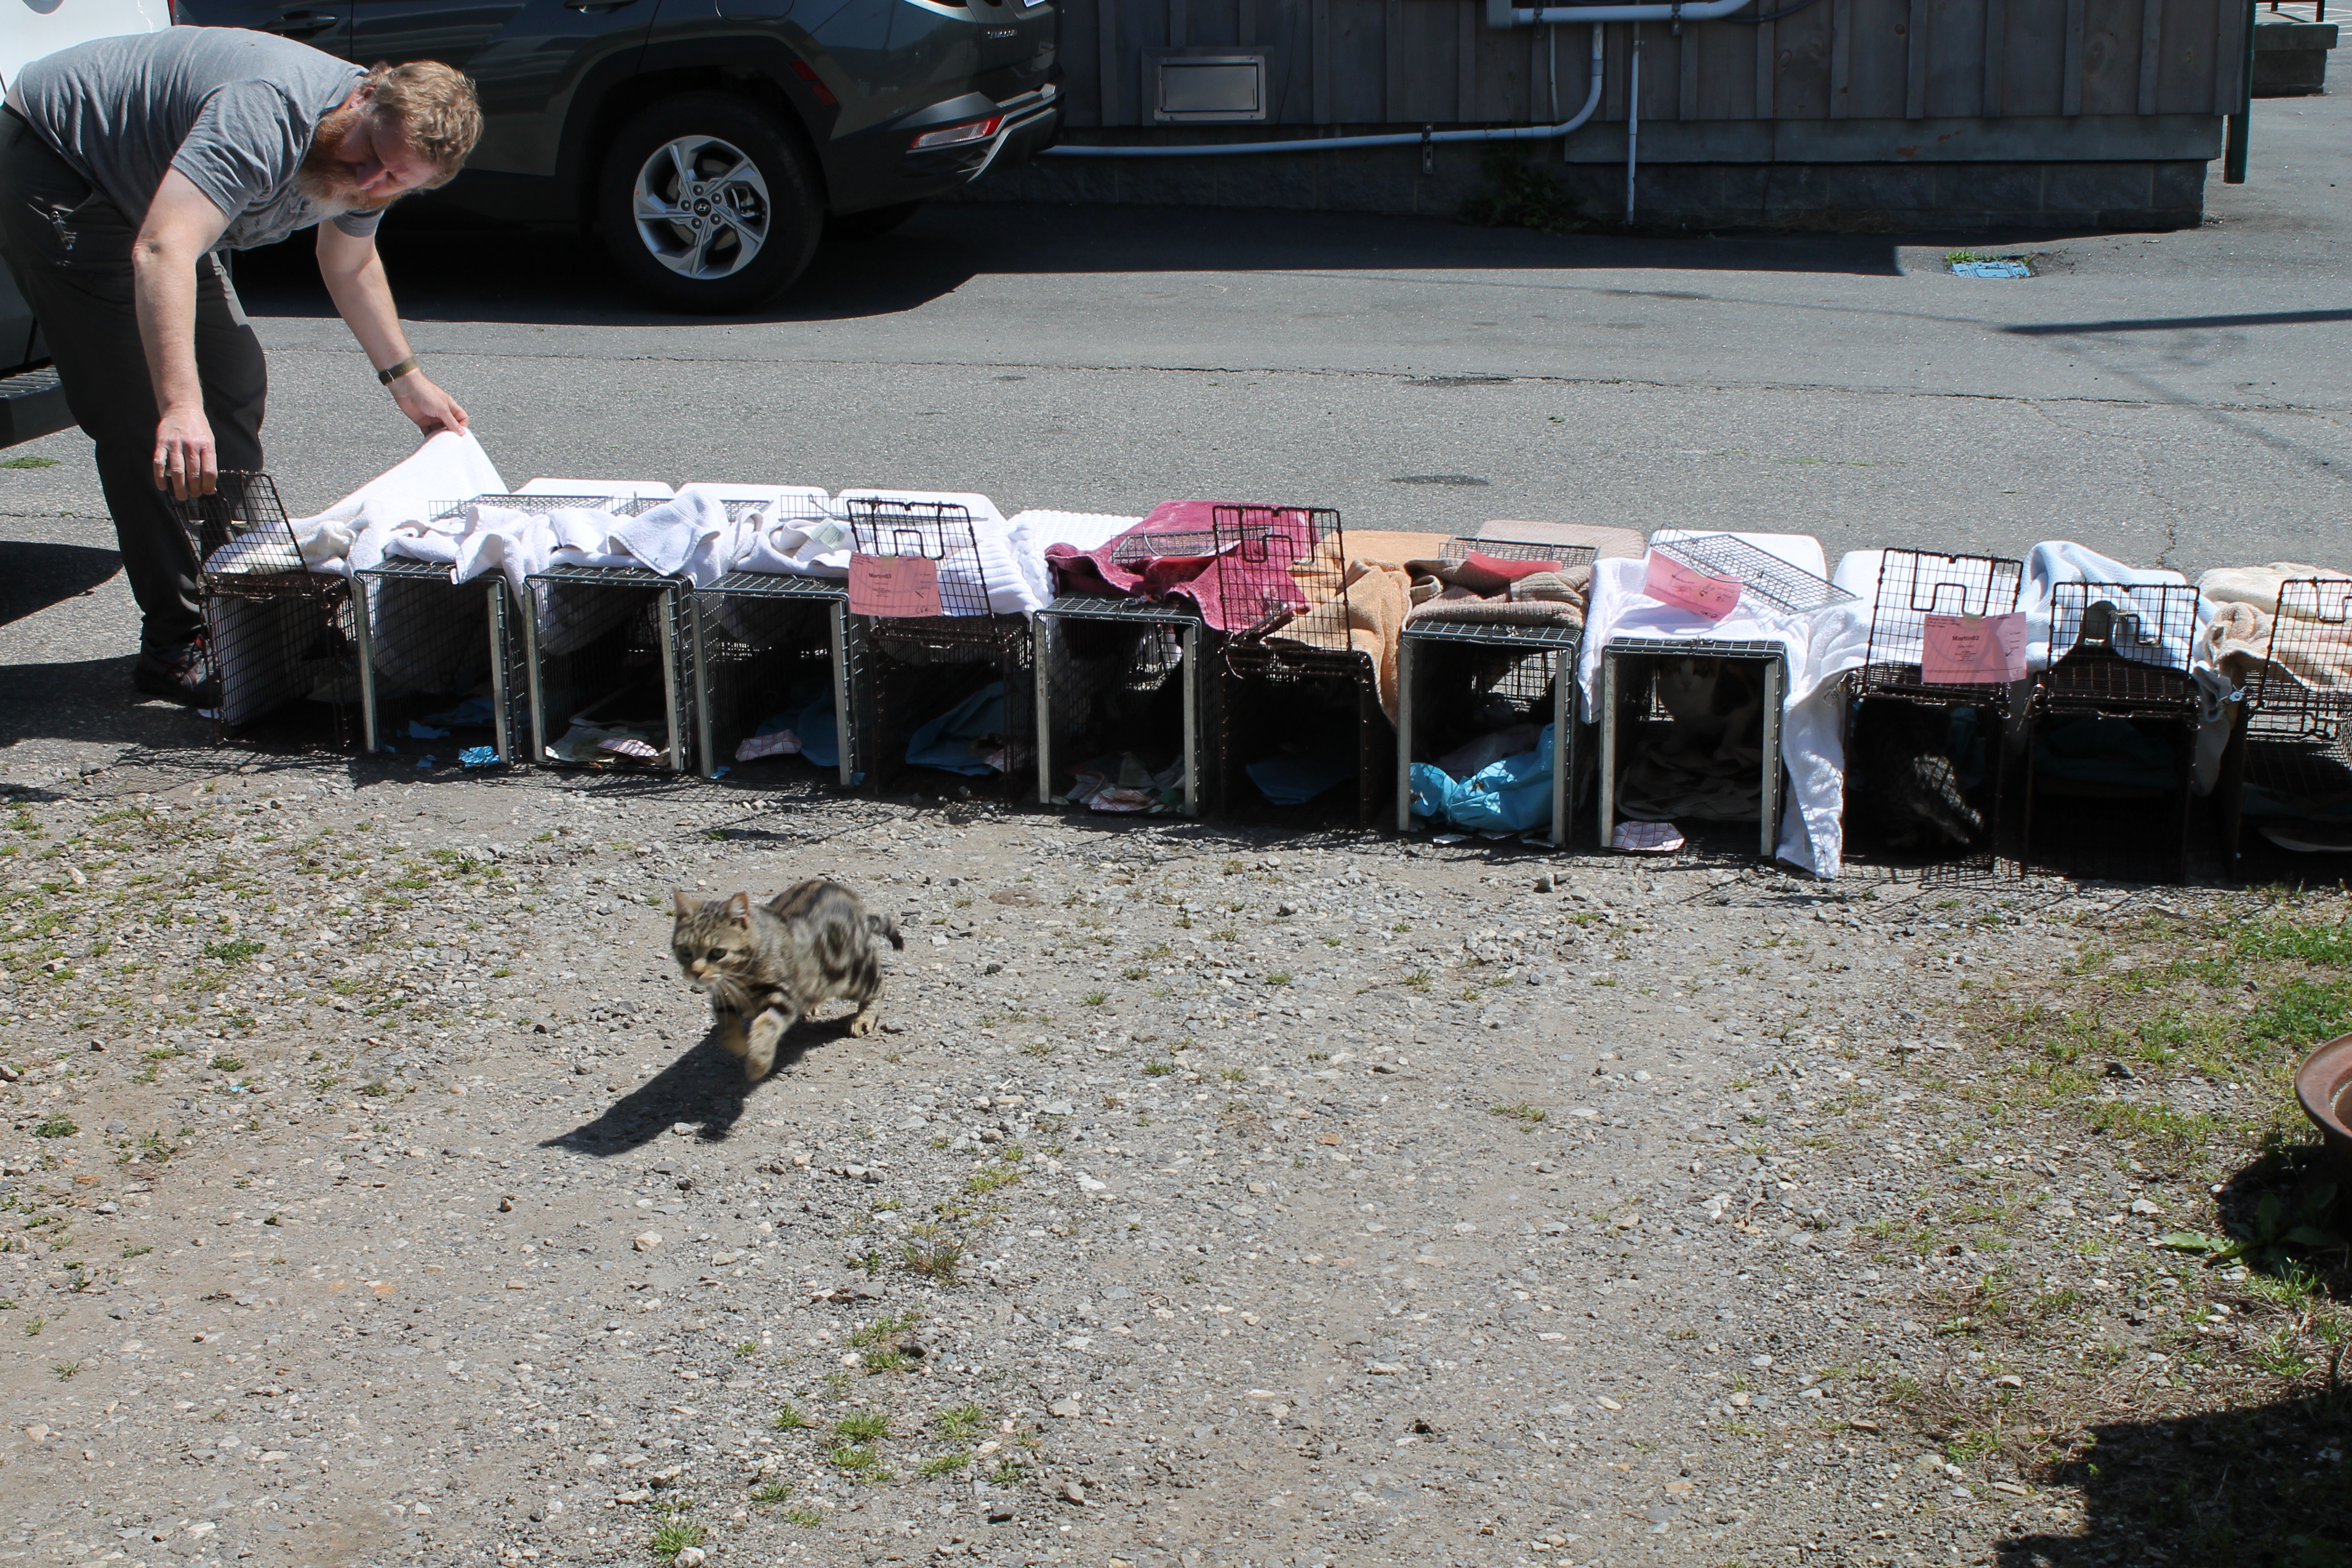 Eric Phelps, founder & director of Sister Kitten, releases 12 cats and kittens on Friday morning, April 22, in downtown Bryson City after the feral animals were caught to be spayed and/or neutered. 